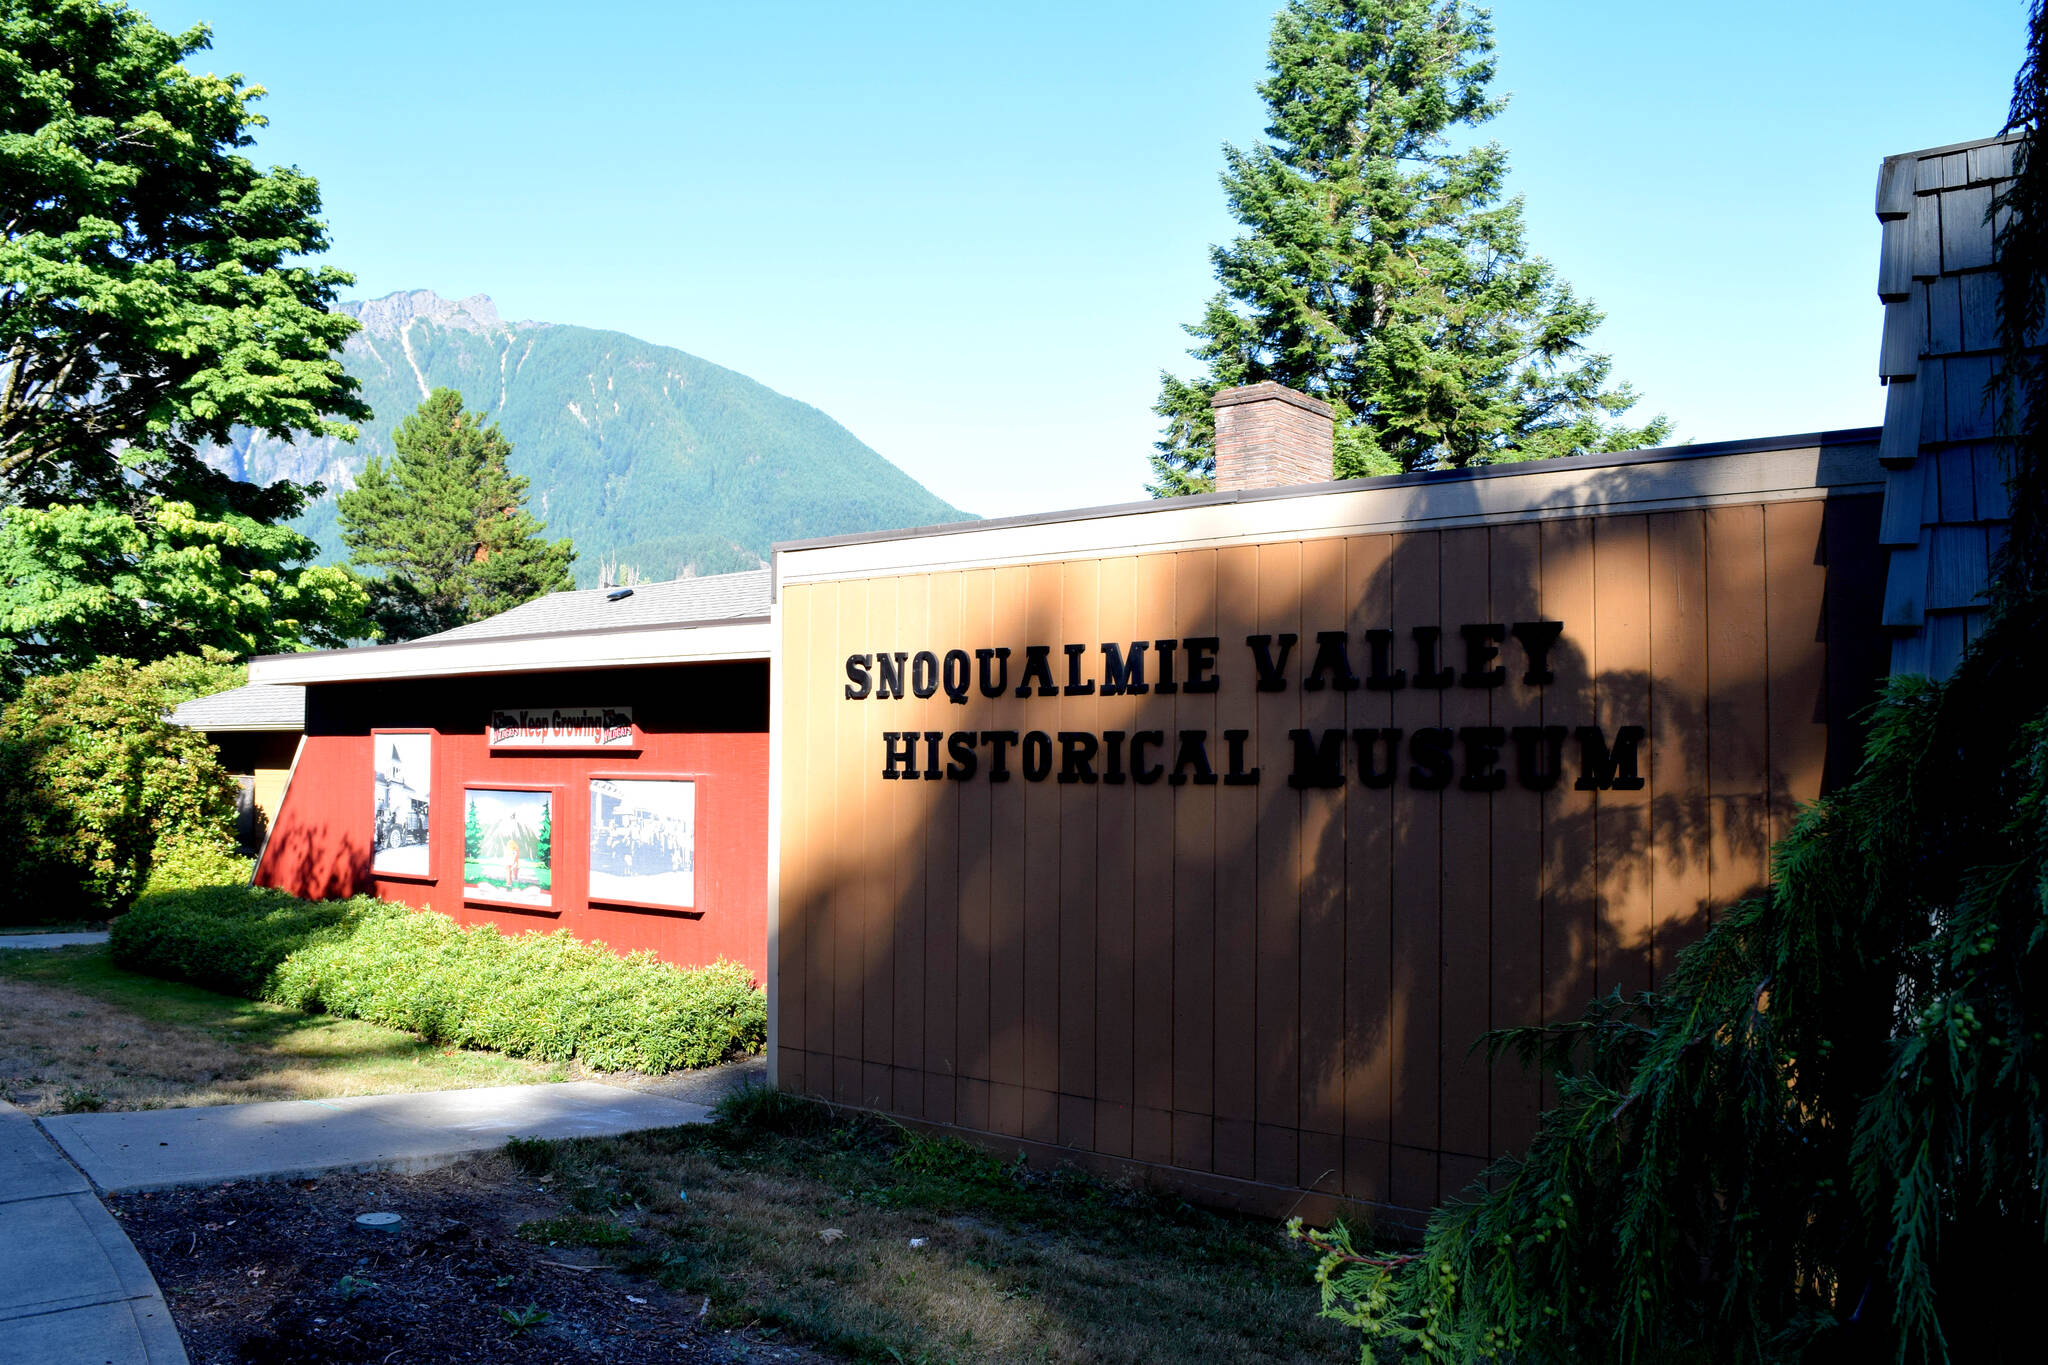 Photo by Conor Wilson/Valley Record.
The Snoqualmie Valley Historical Museum.